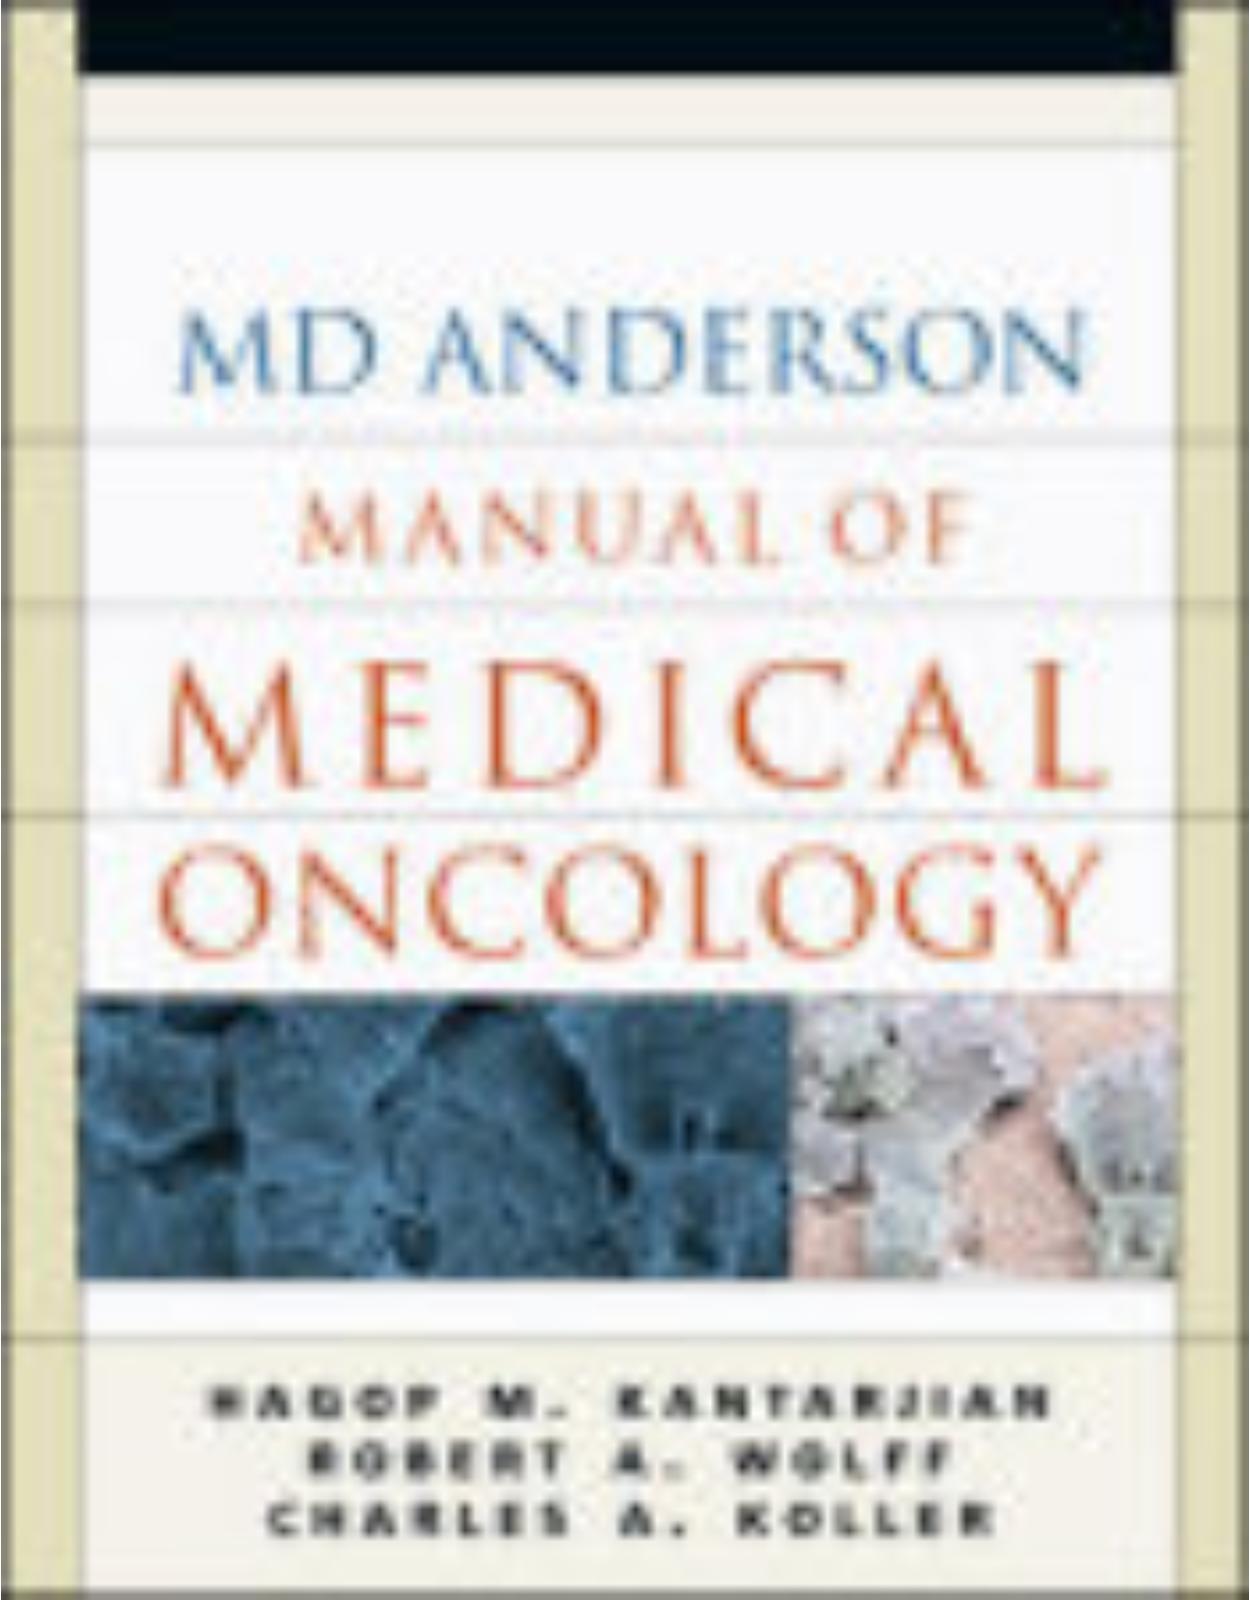 The M.D Anderson Manual of Medical Oncology